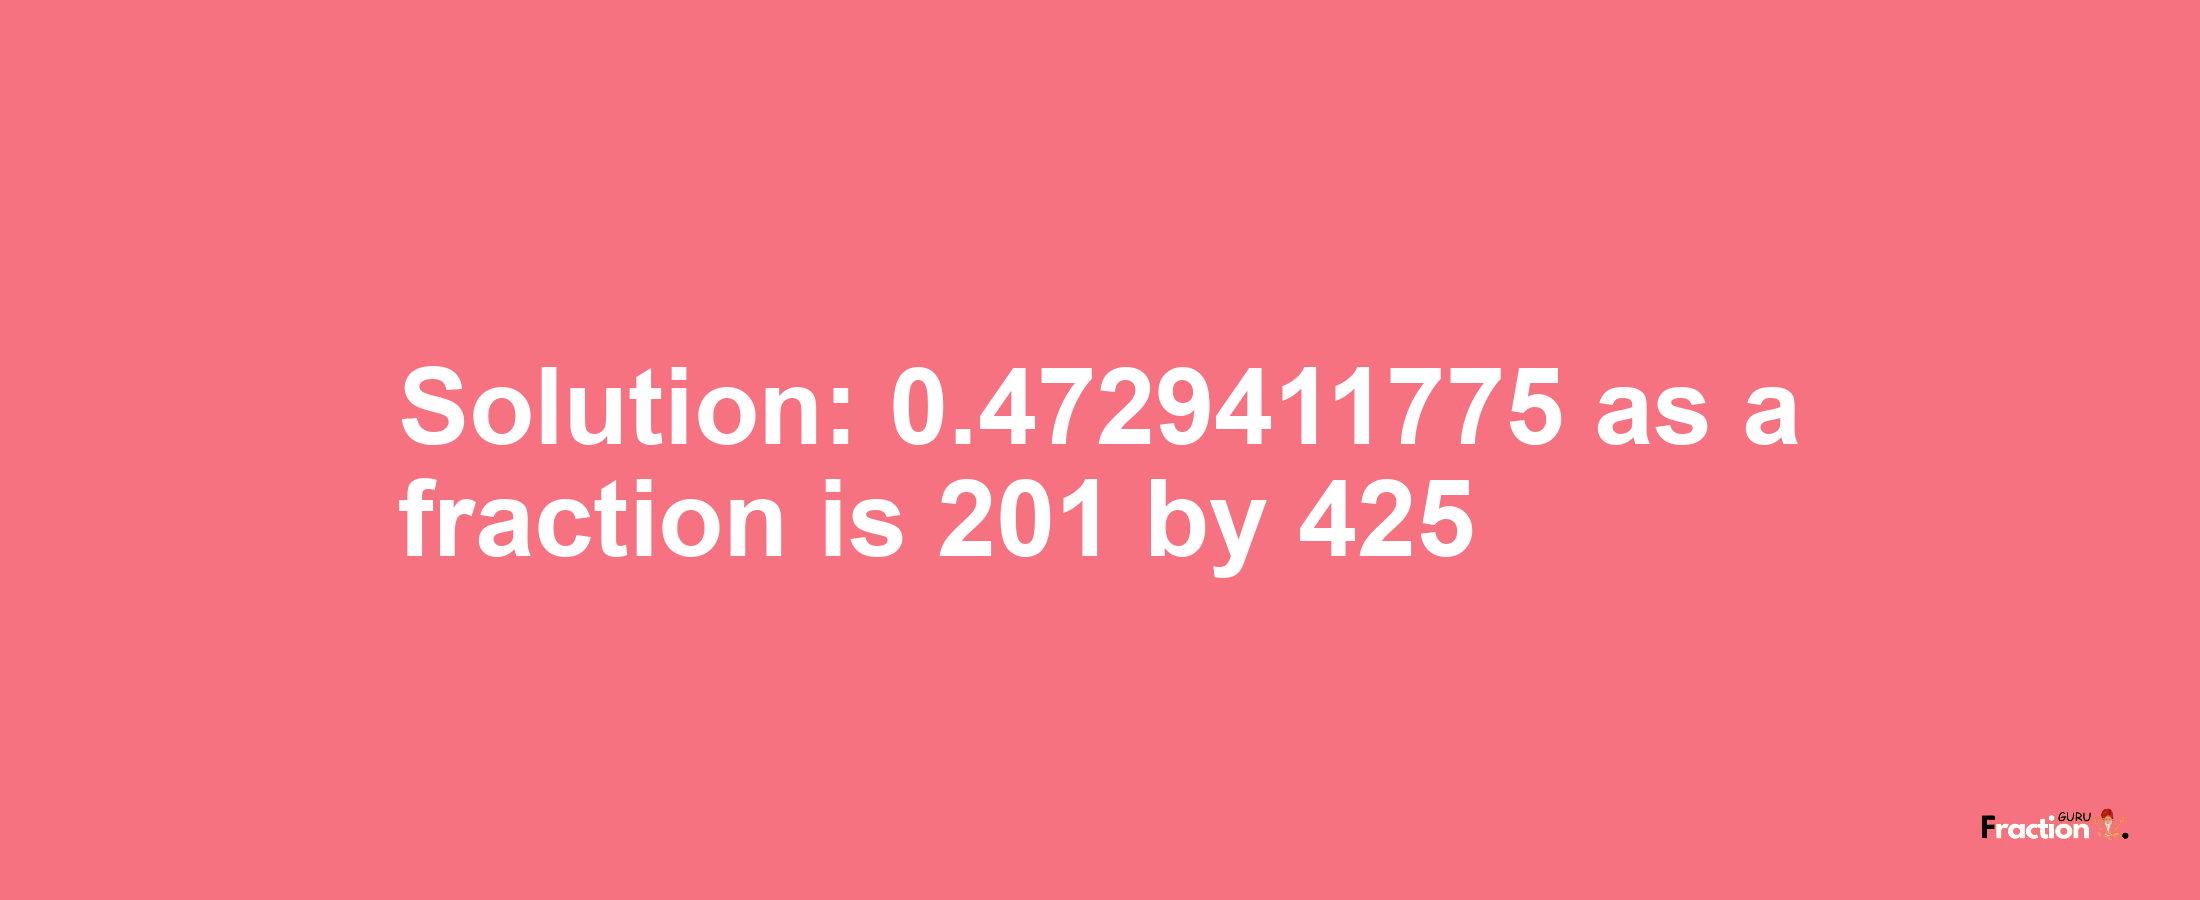 Solution:0.4729411775 as a fraction is 201/425